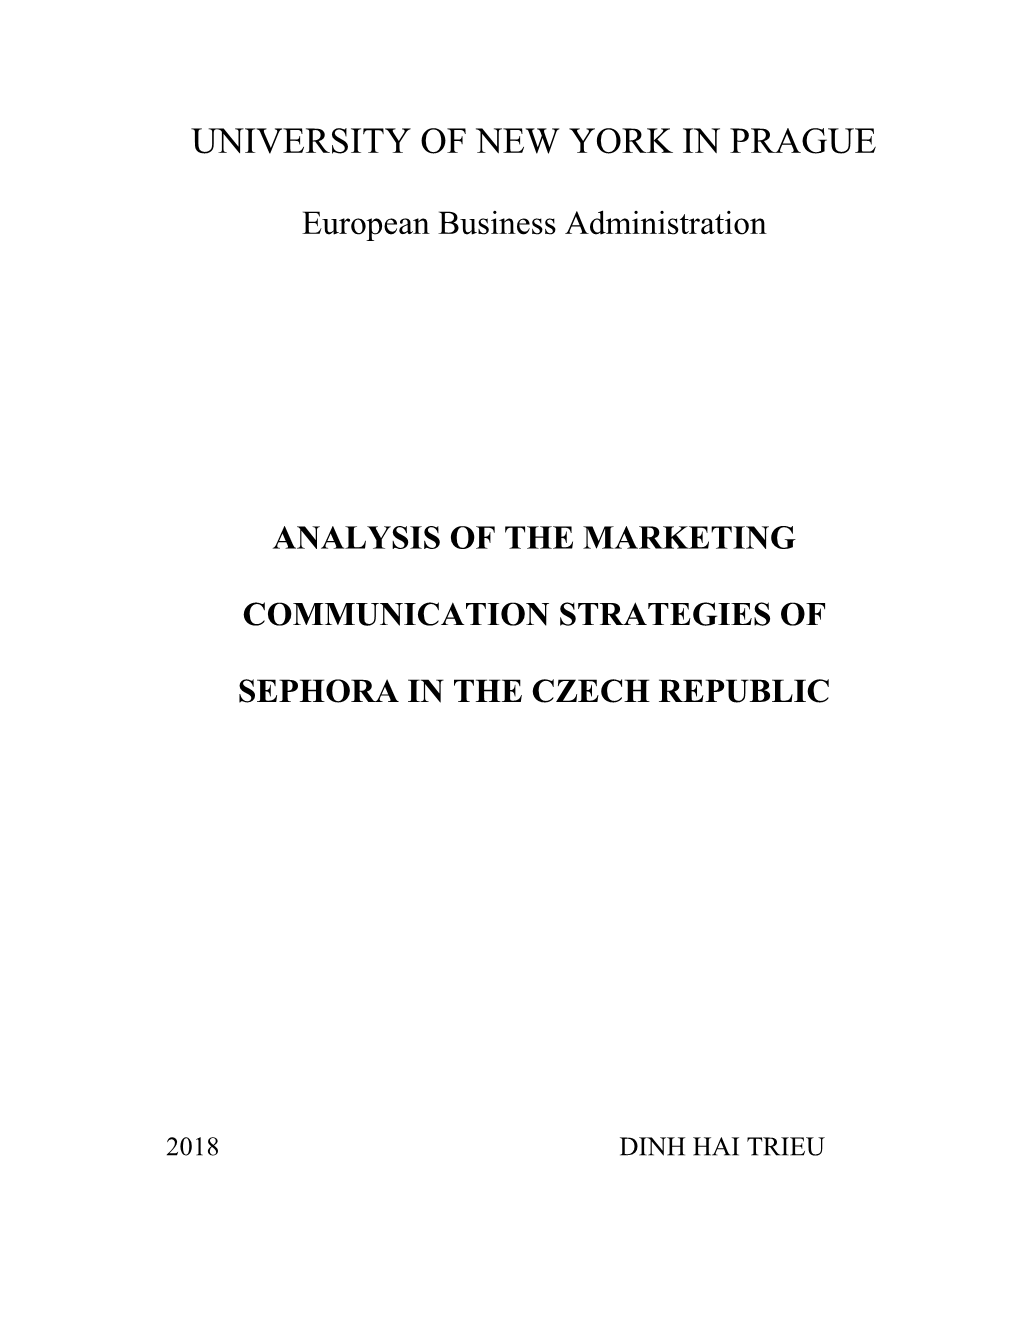 Analysis of the Marketing Communication Strategies of Sephora in the Czech Republic